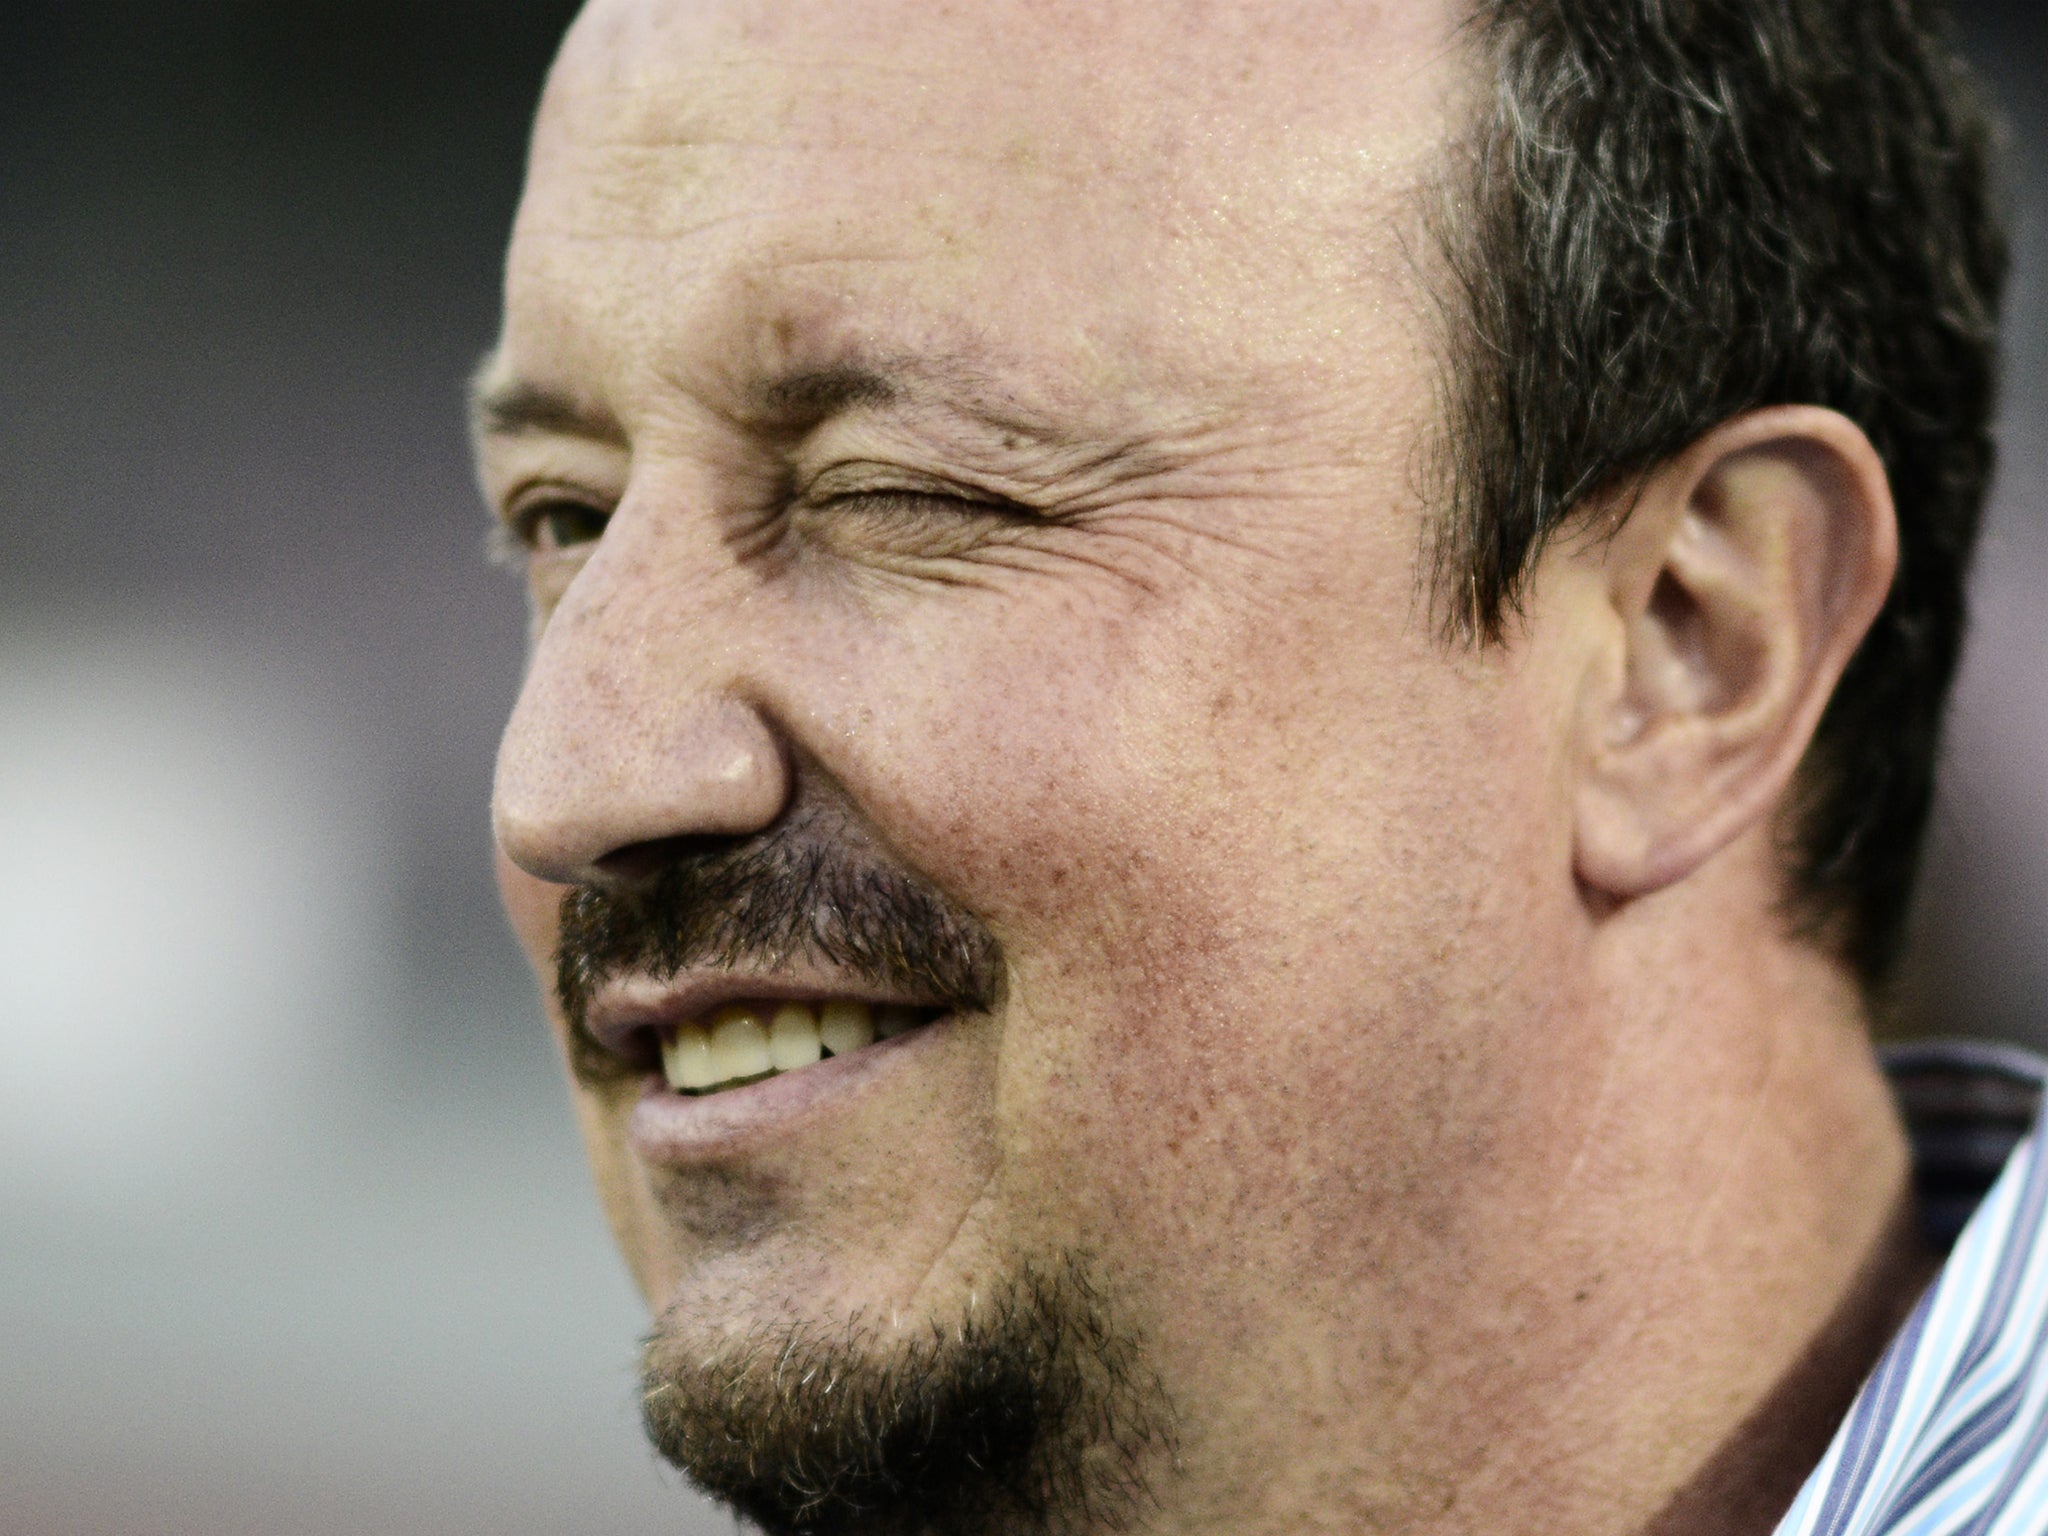 New Napoli manager Rafa Benitez appears happy with what he is seeing in their pre-season friendly against Galatasaray.